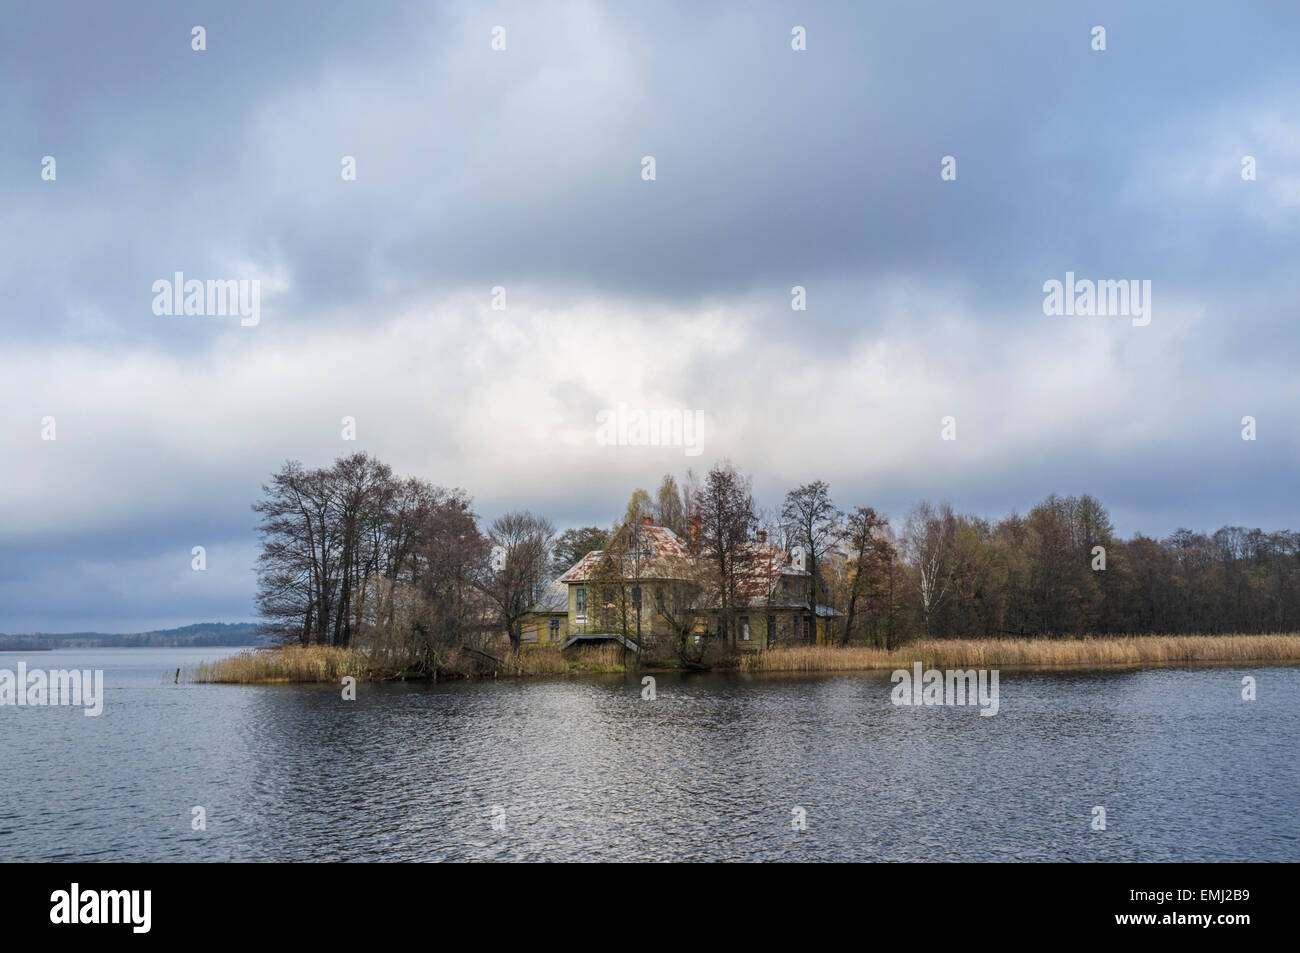 Landscape with wood cabin at an island on lake Galve, Trakai, Lithuania Stock Photo